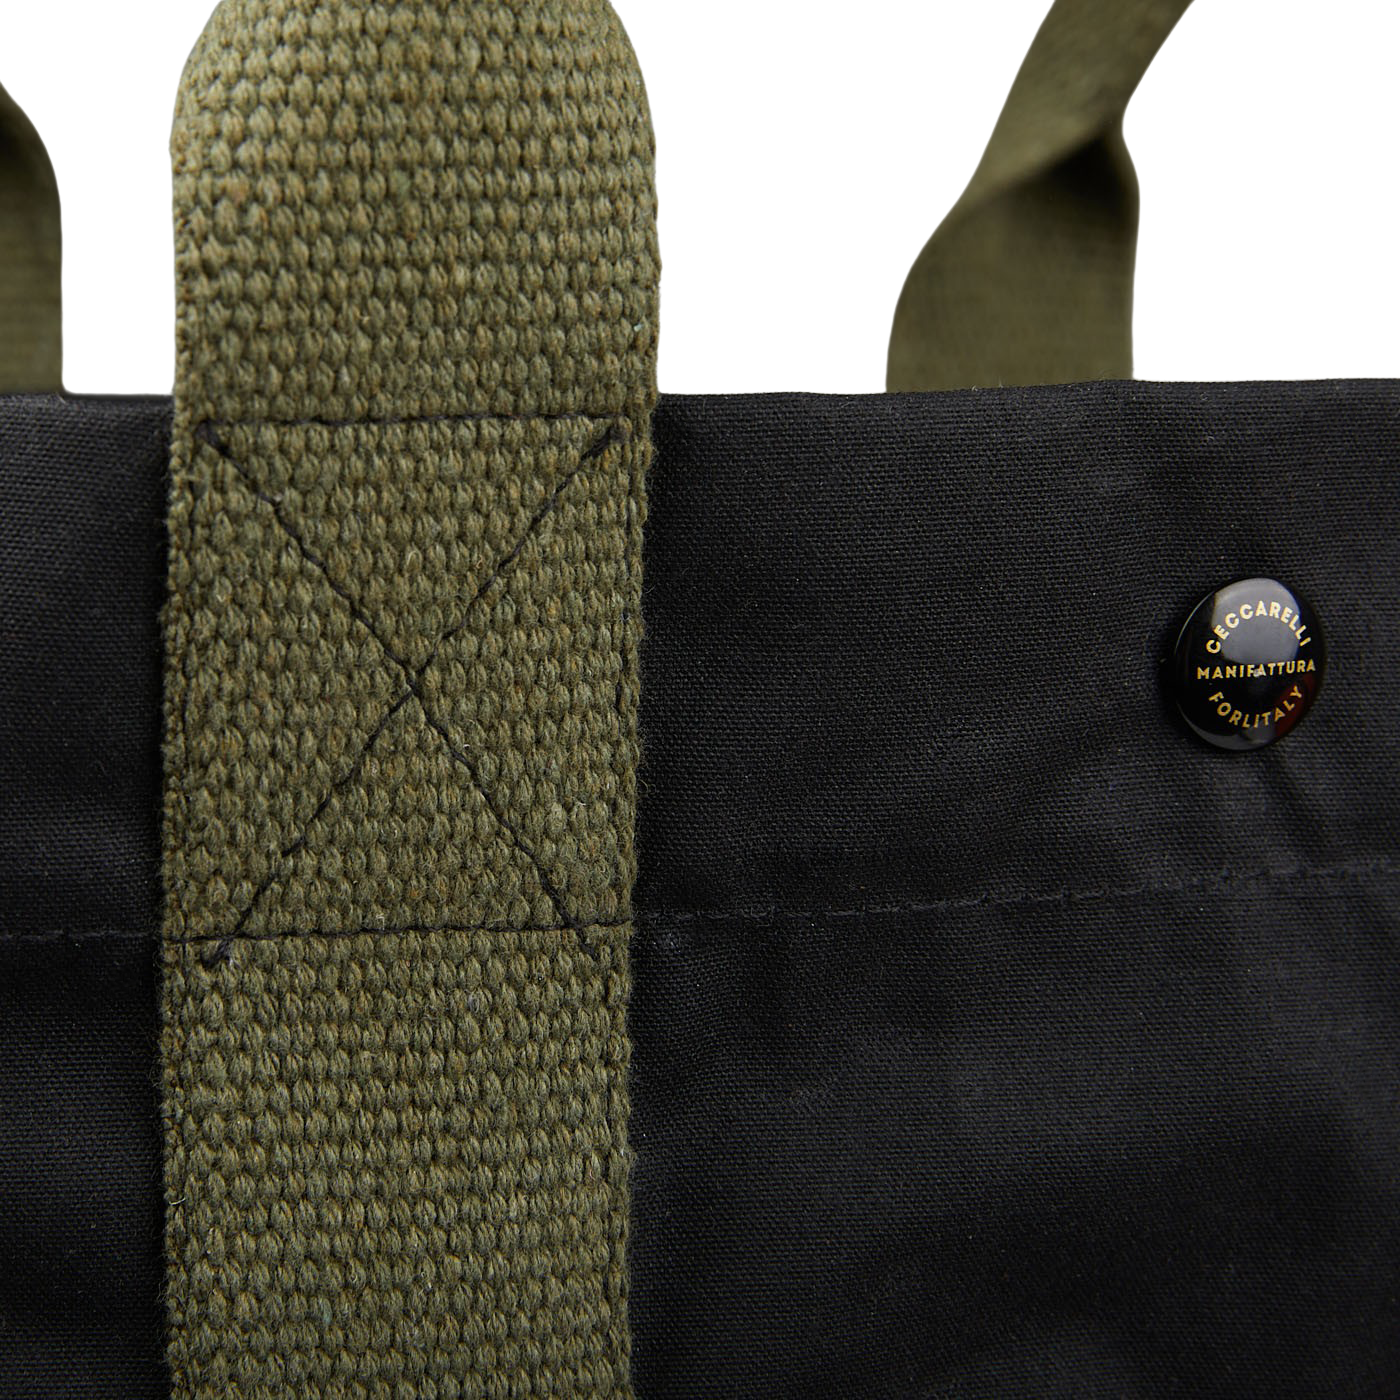 A close up of a Manifattura Ceccarelli Black Waxed Cotton Tote Bag with canvas details in a dark green shade.